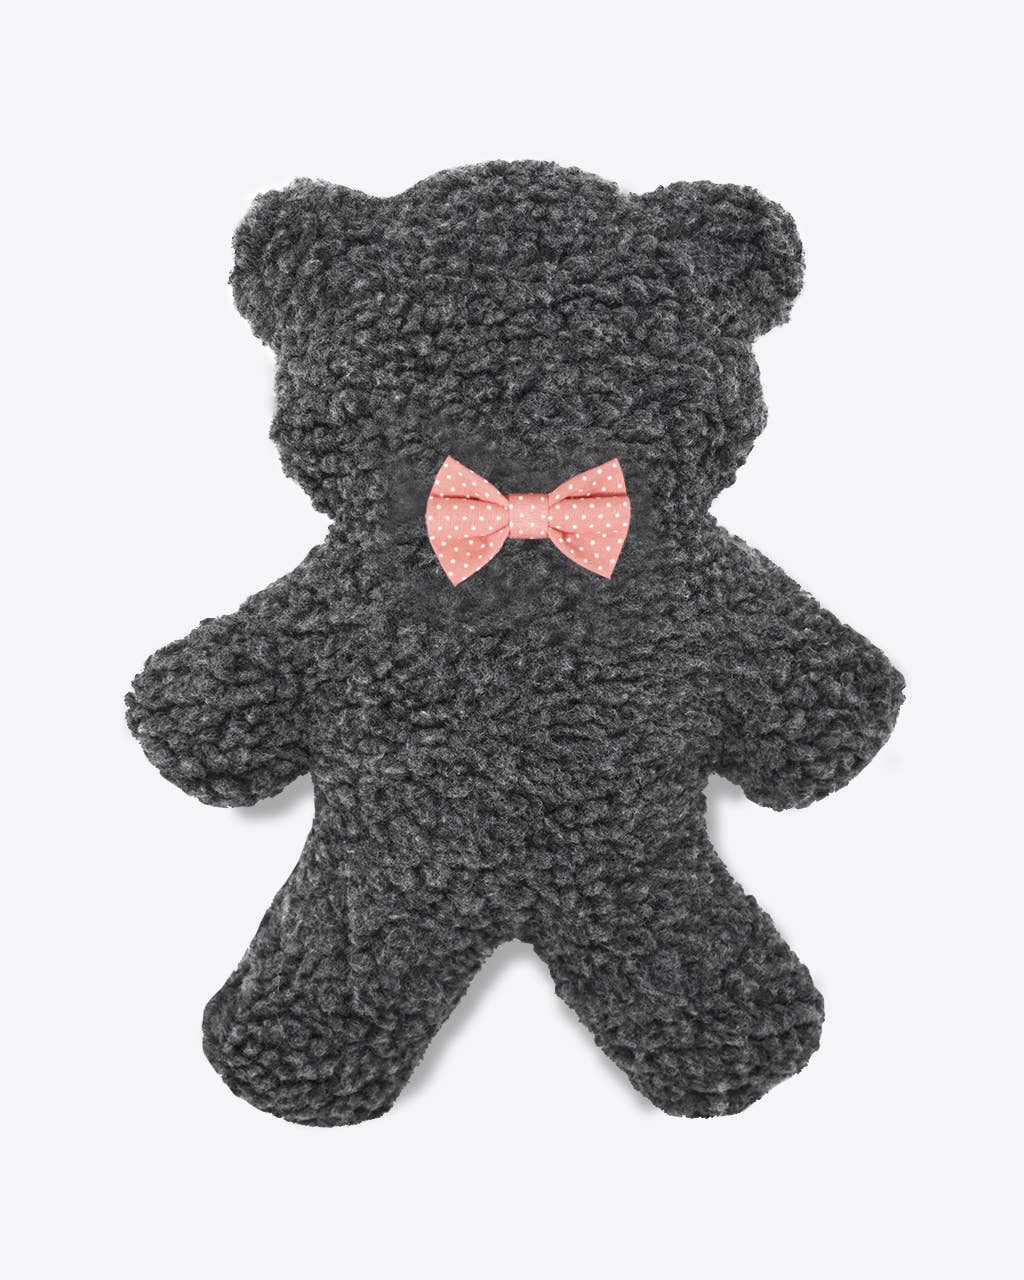 LAVENDER BEDTIME BEAR - Charcoal (Options Available)